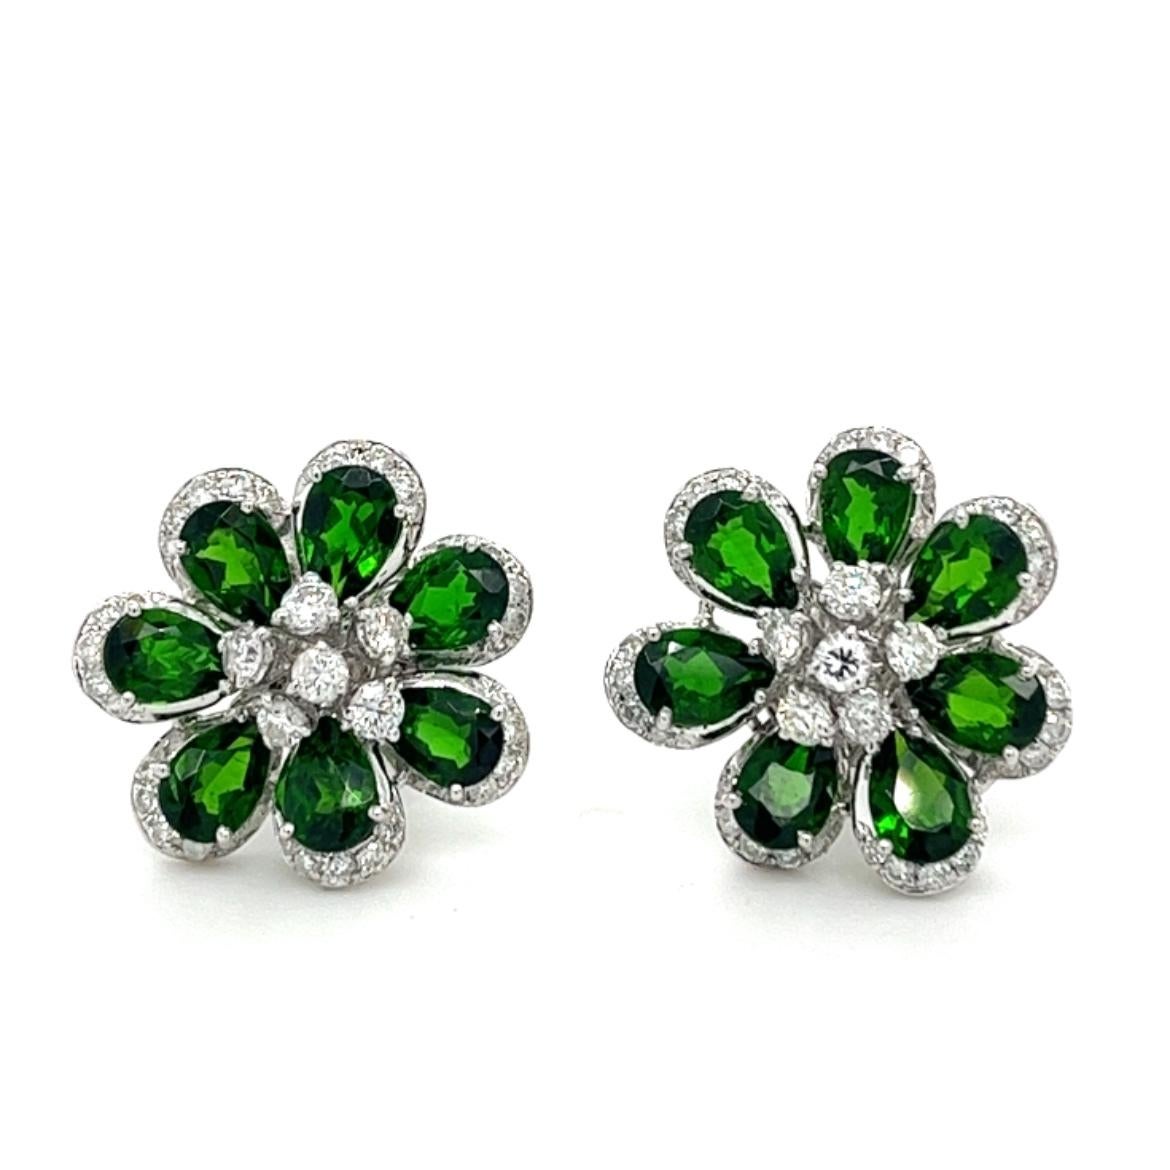 18K White Gold Diopside Stud Earrings with Diamonds

14 Diopsides - 5.93 CT
82 Diamonds - 1.35 CT
18K Gold - 6.08 GM

These stunning earrings feature a collection of richly-colored diopside gemstones, perfectly complemented by sparkling diamonds.